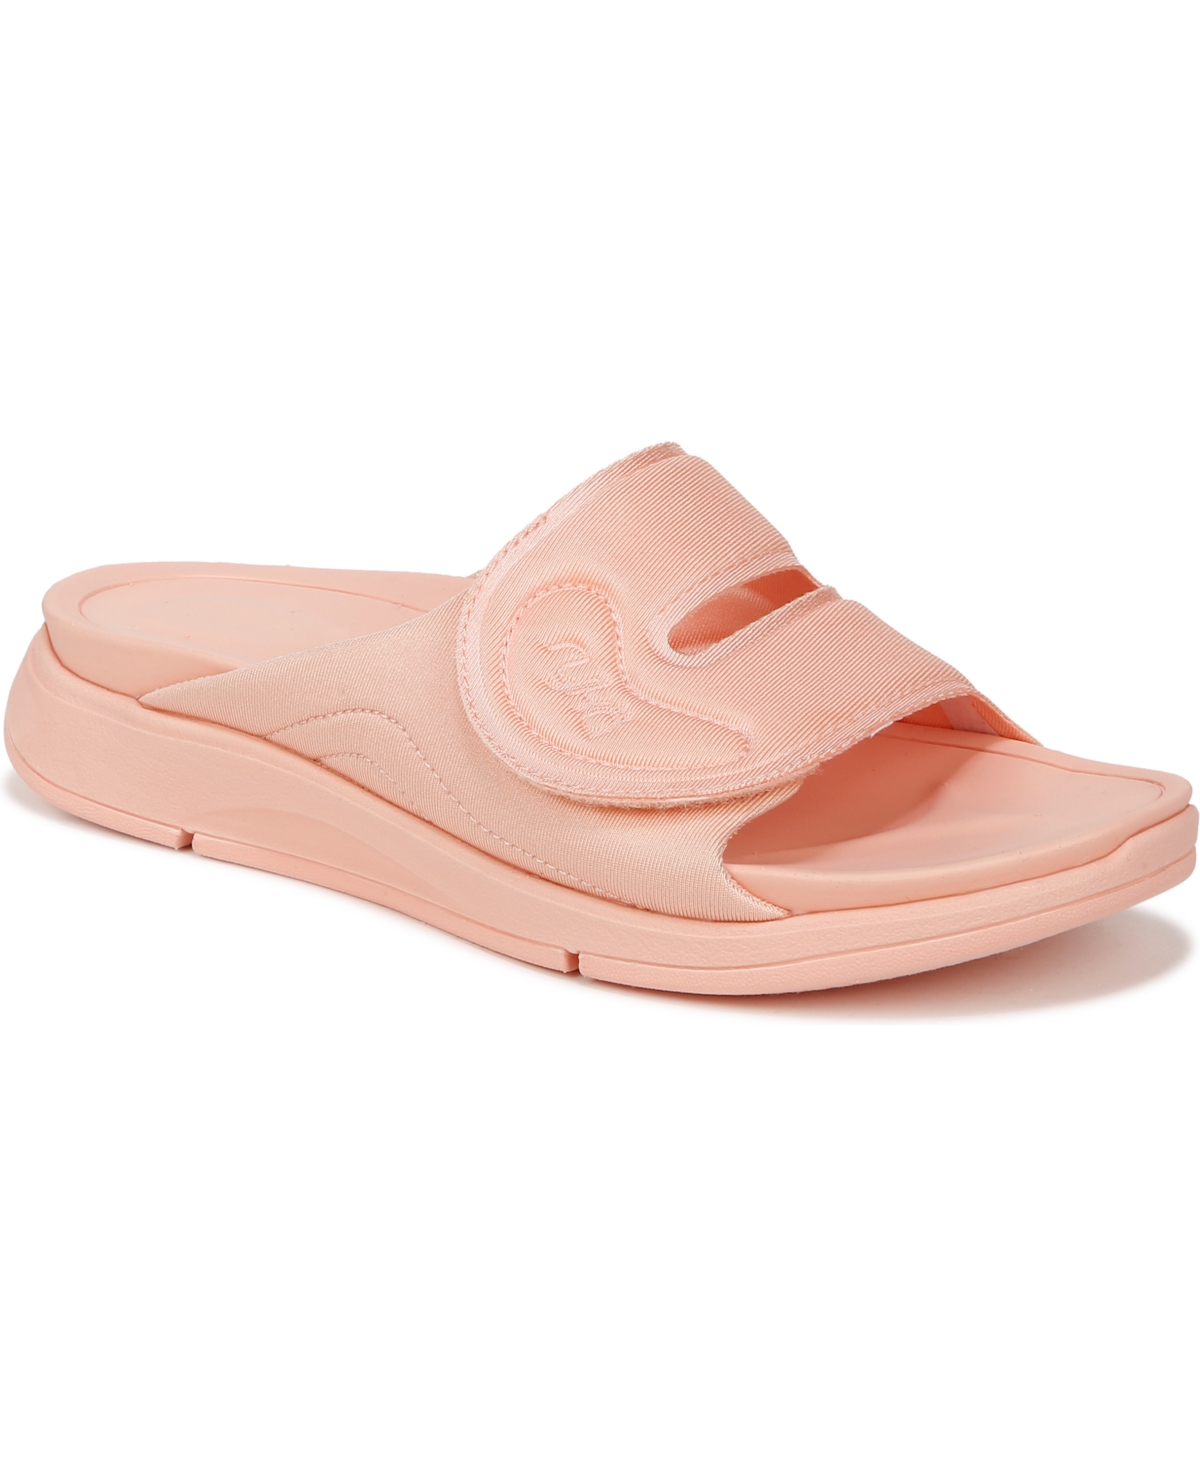 Women's Tao Recovery Slide Sandals - Peachy Pink Fabric